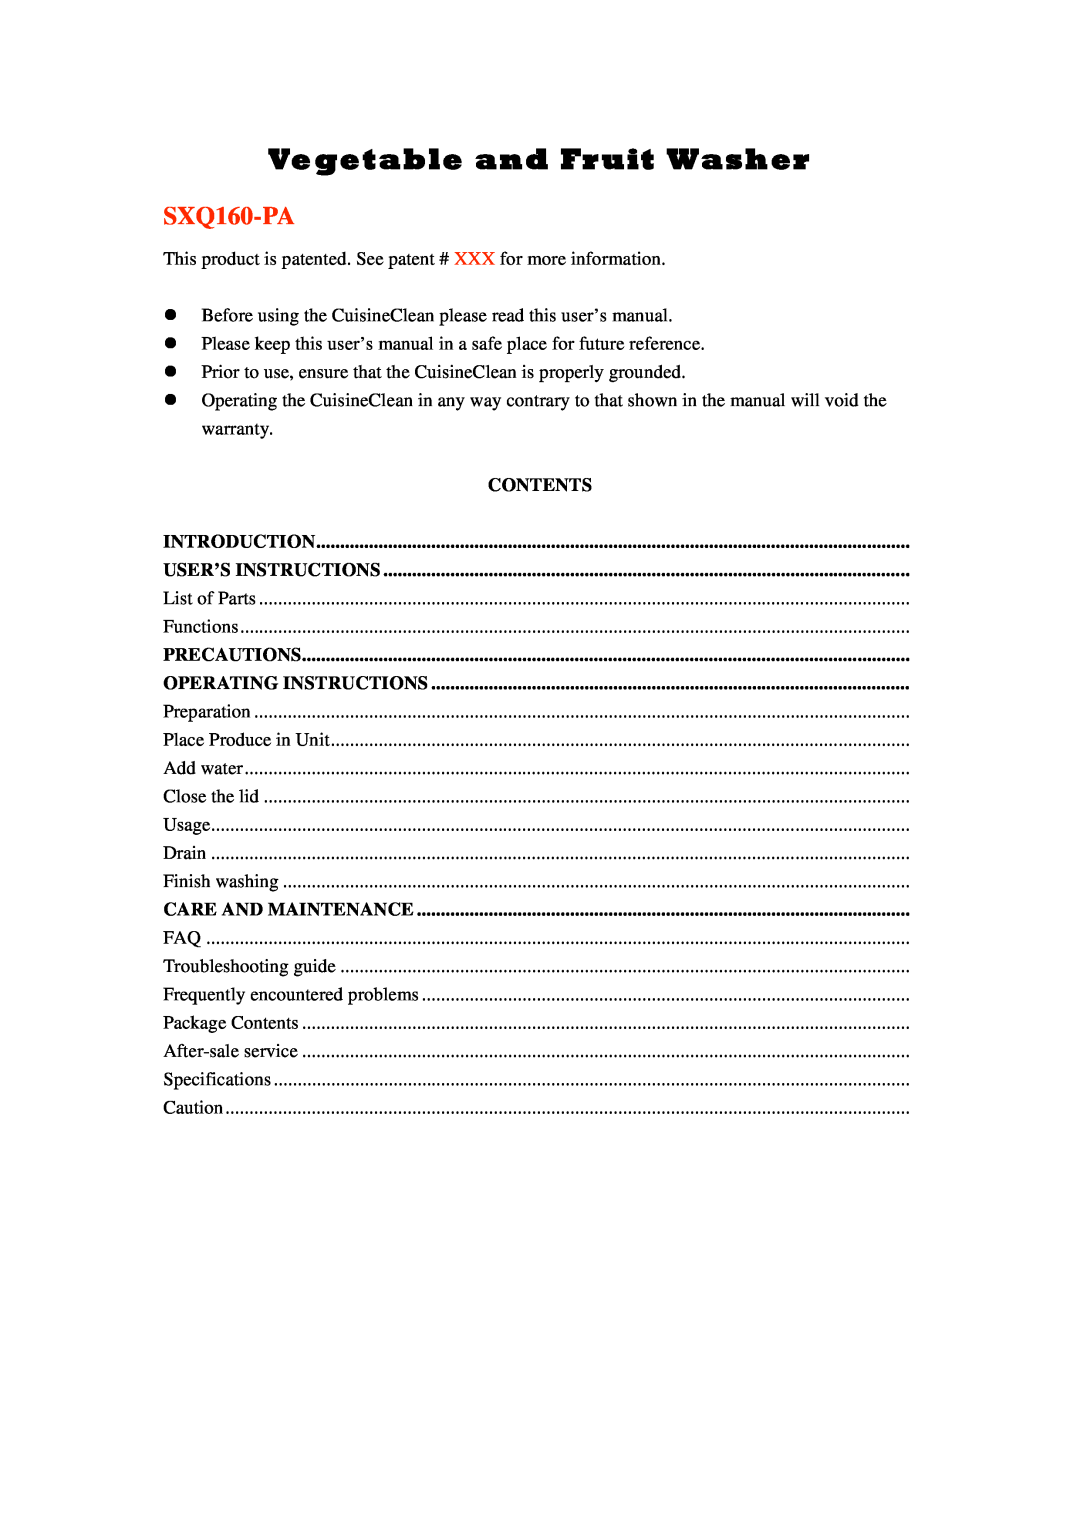 Vesture SXQ160-PA user manual Contents Introduction User’S Instructions, Precautions Operating Instructions 